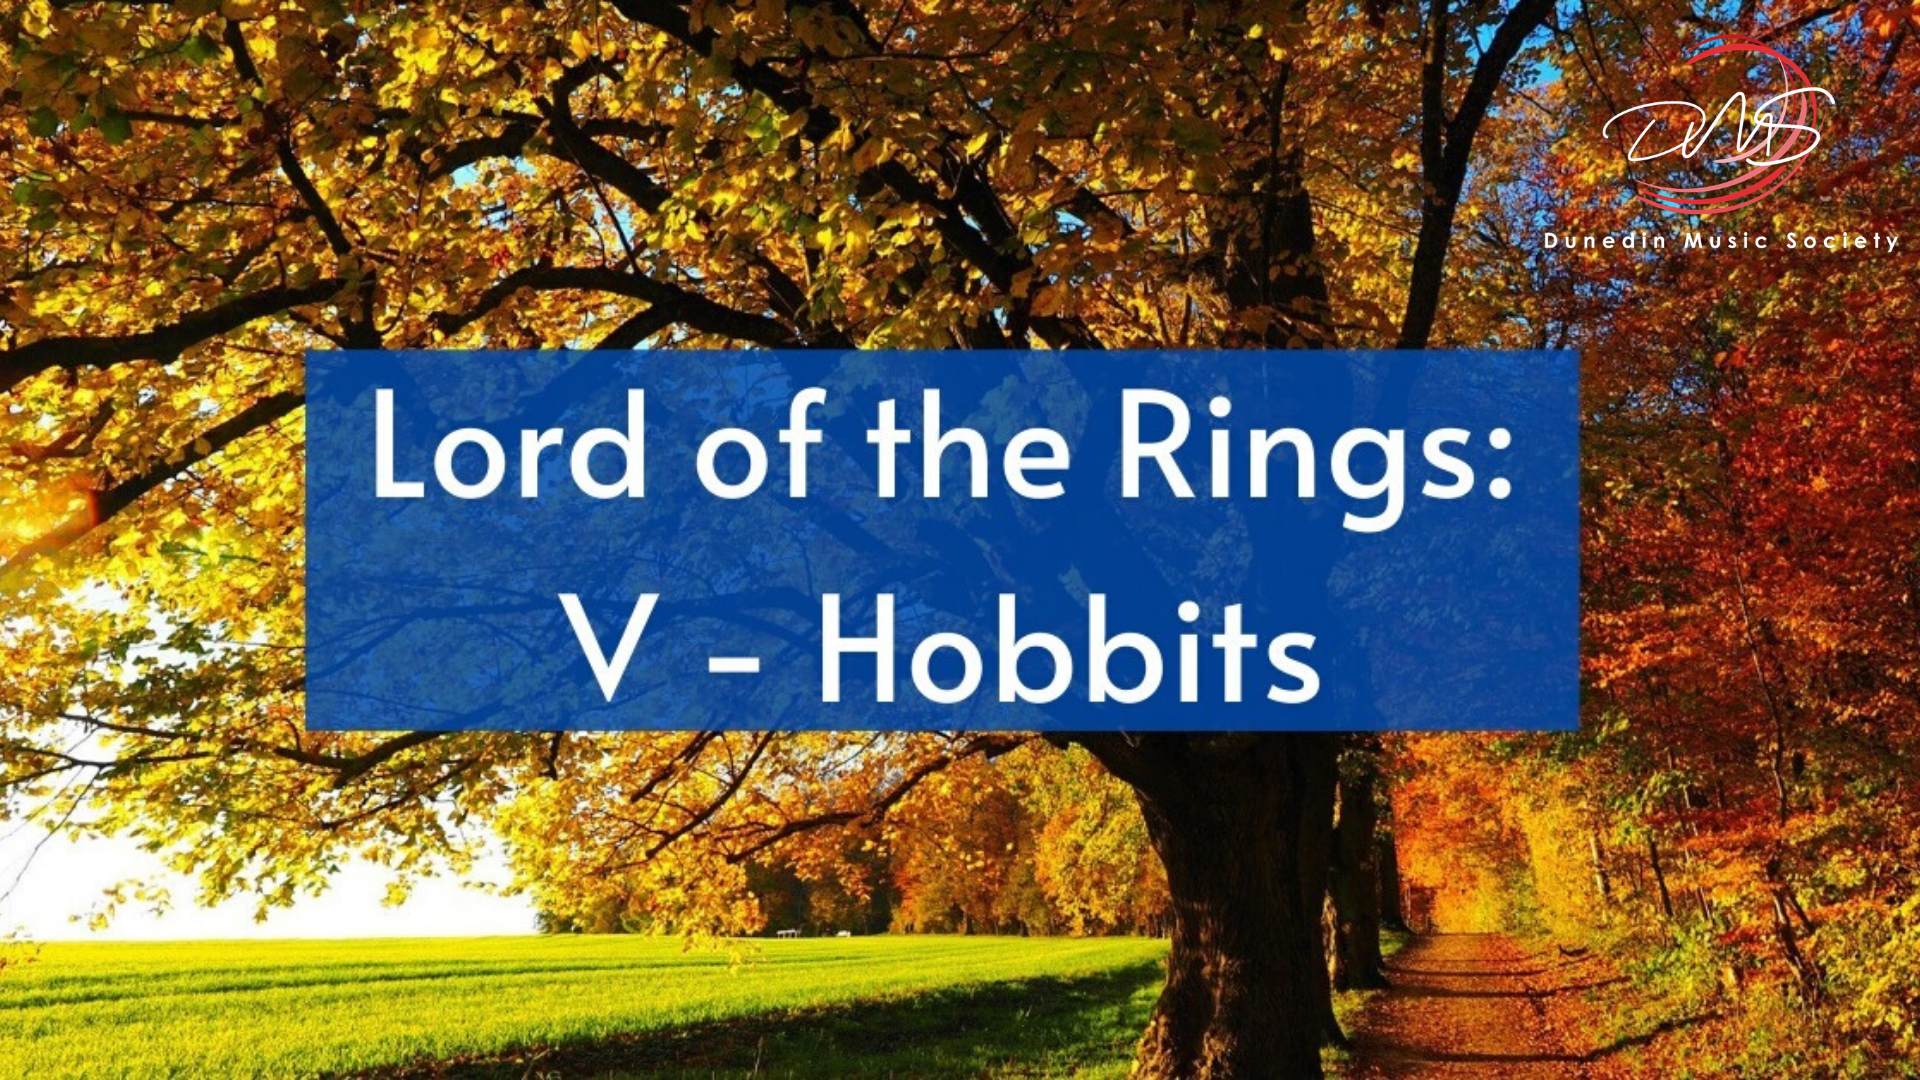 Dunedin Music Society: DCB Repertoire Workshop 10 - Symphony 1 "Lord of the Rings" movement 5 "Hobbits"